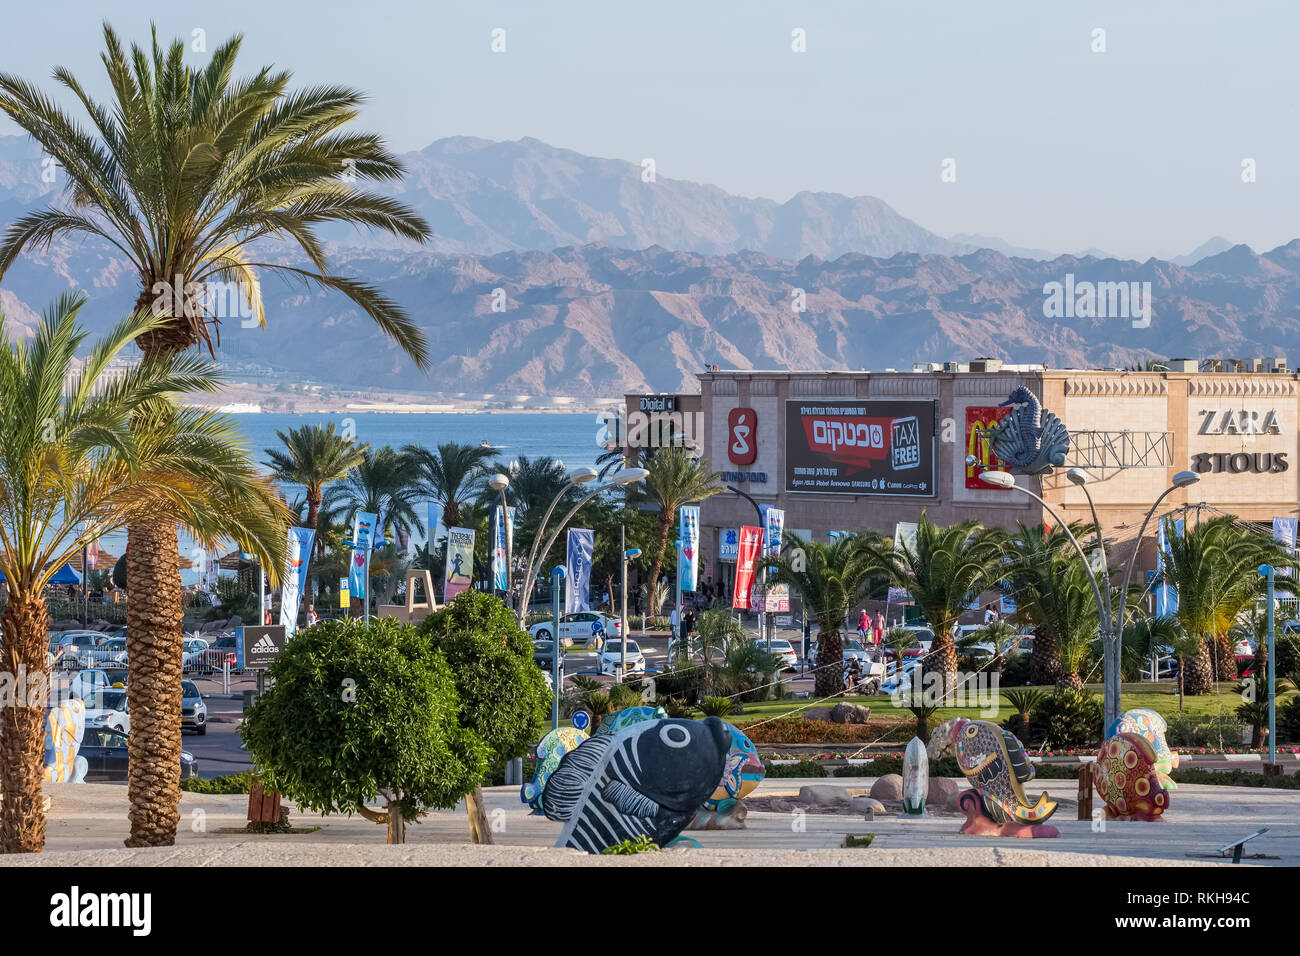 Eilat, Israel - November 28, 2018: View of Eilat. Eilat is the famous resort city on the red sea in Israel Stock Photo